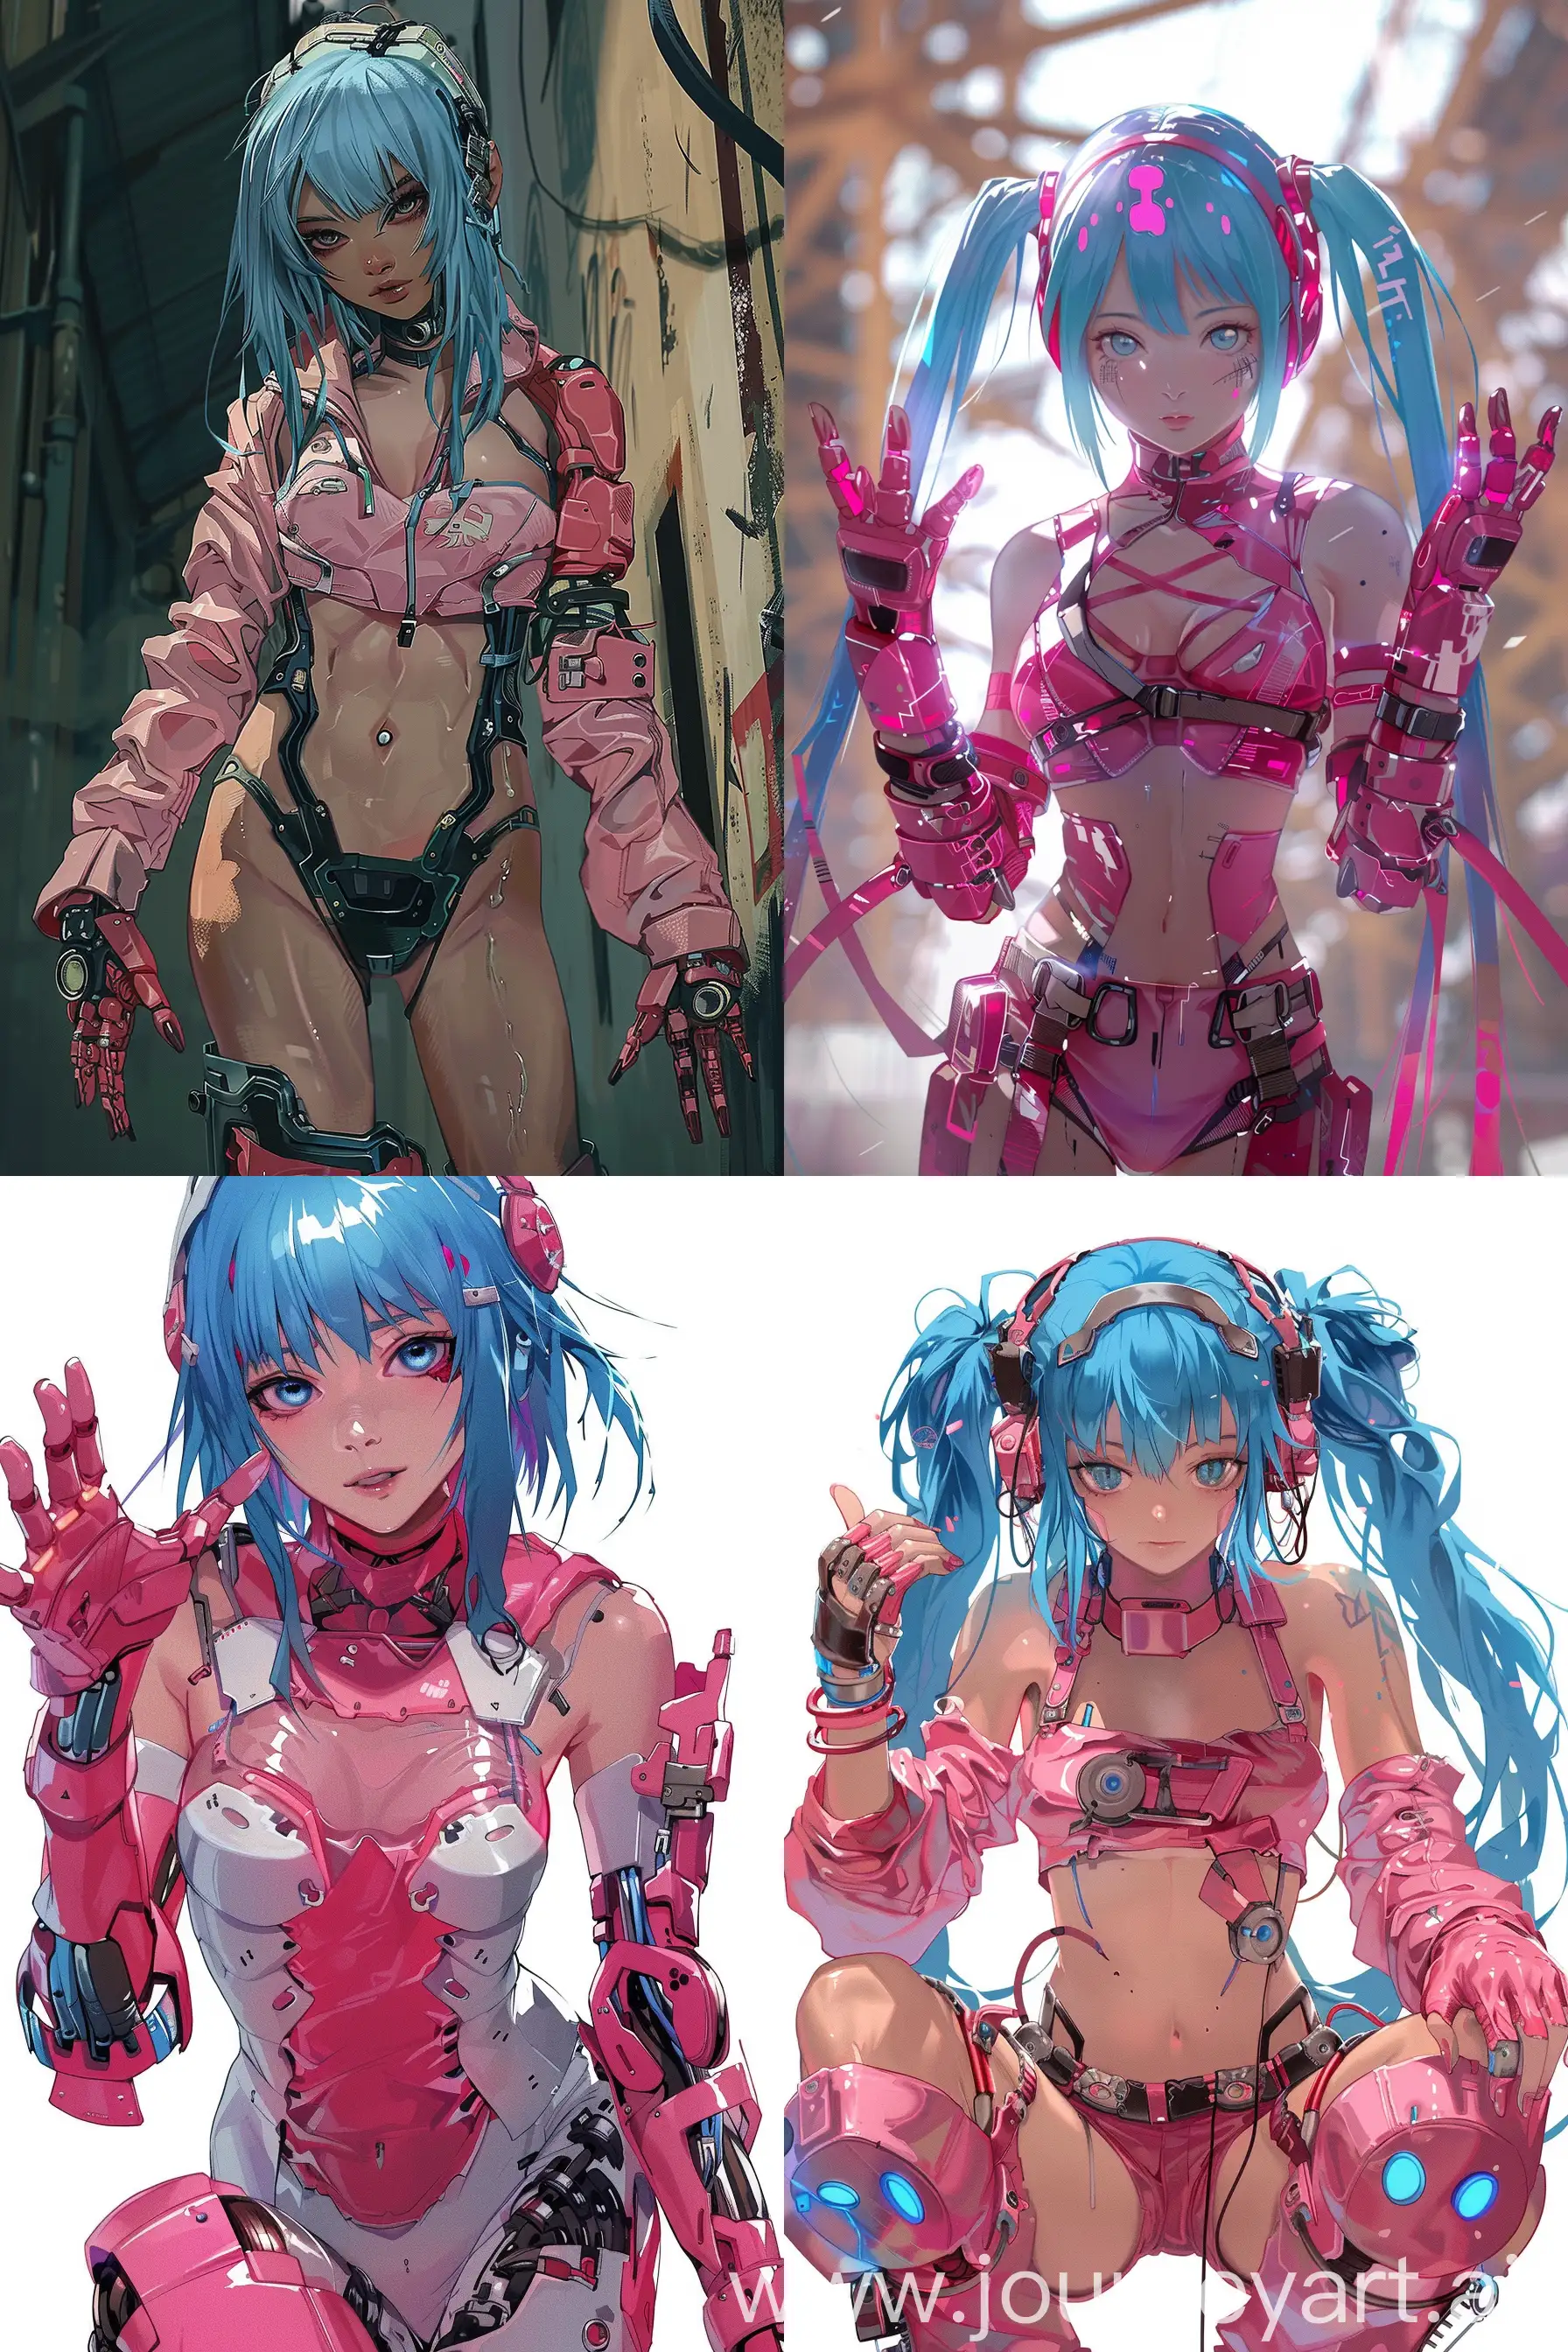 Cyberpunk-Anime-Girl-in-Pink-Clothes-with-Blue-Hair